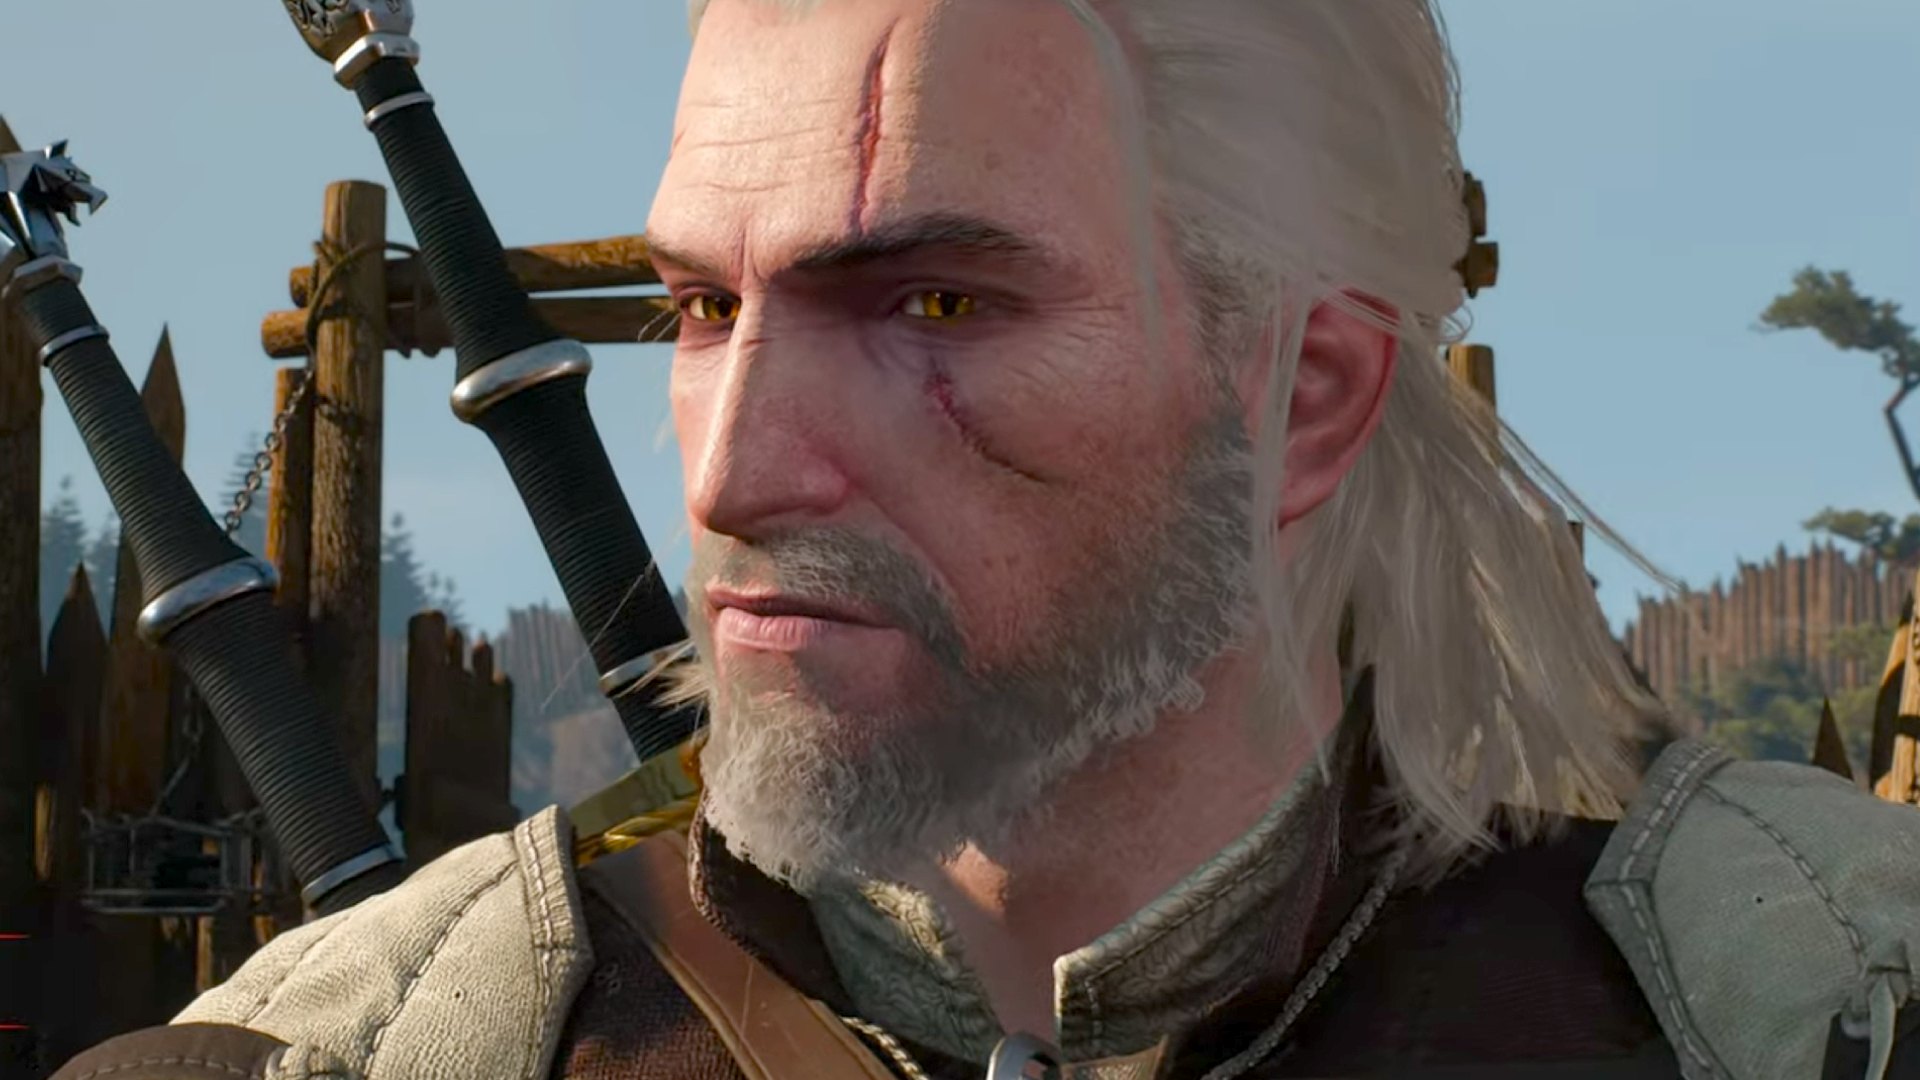 The Witcher 3 next-gen overview flaunts new gaming PC features